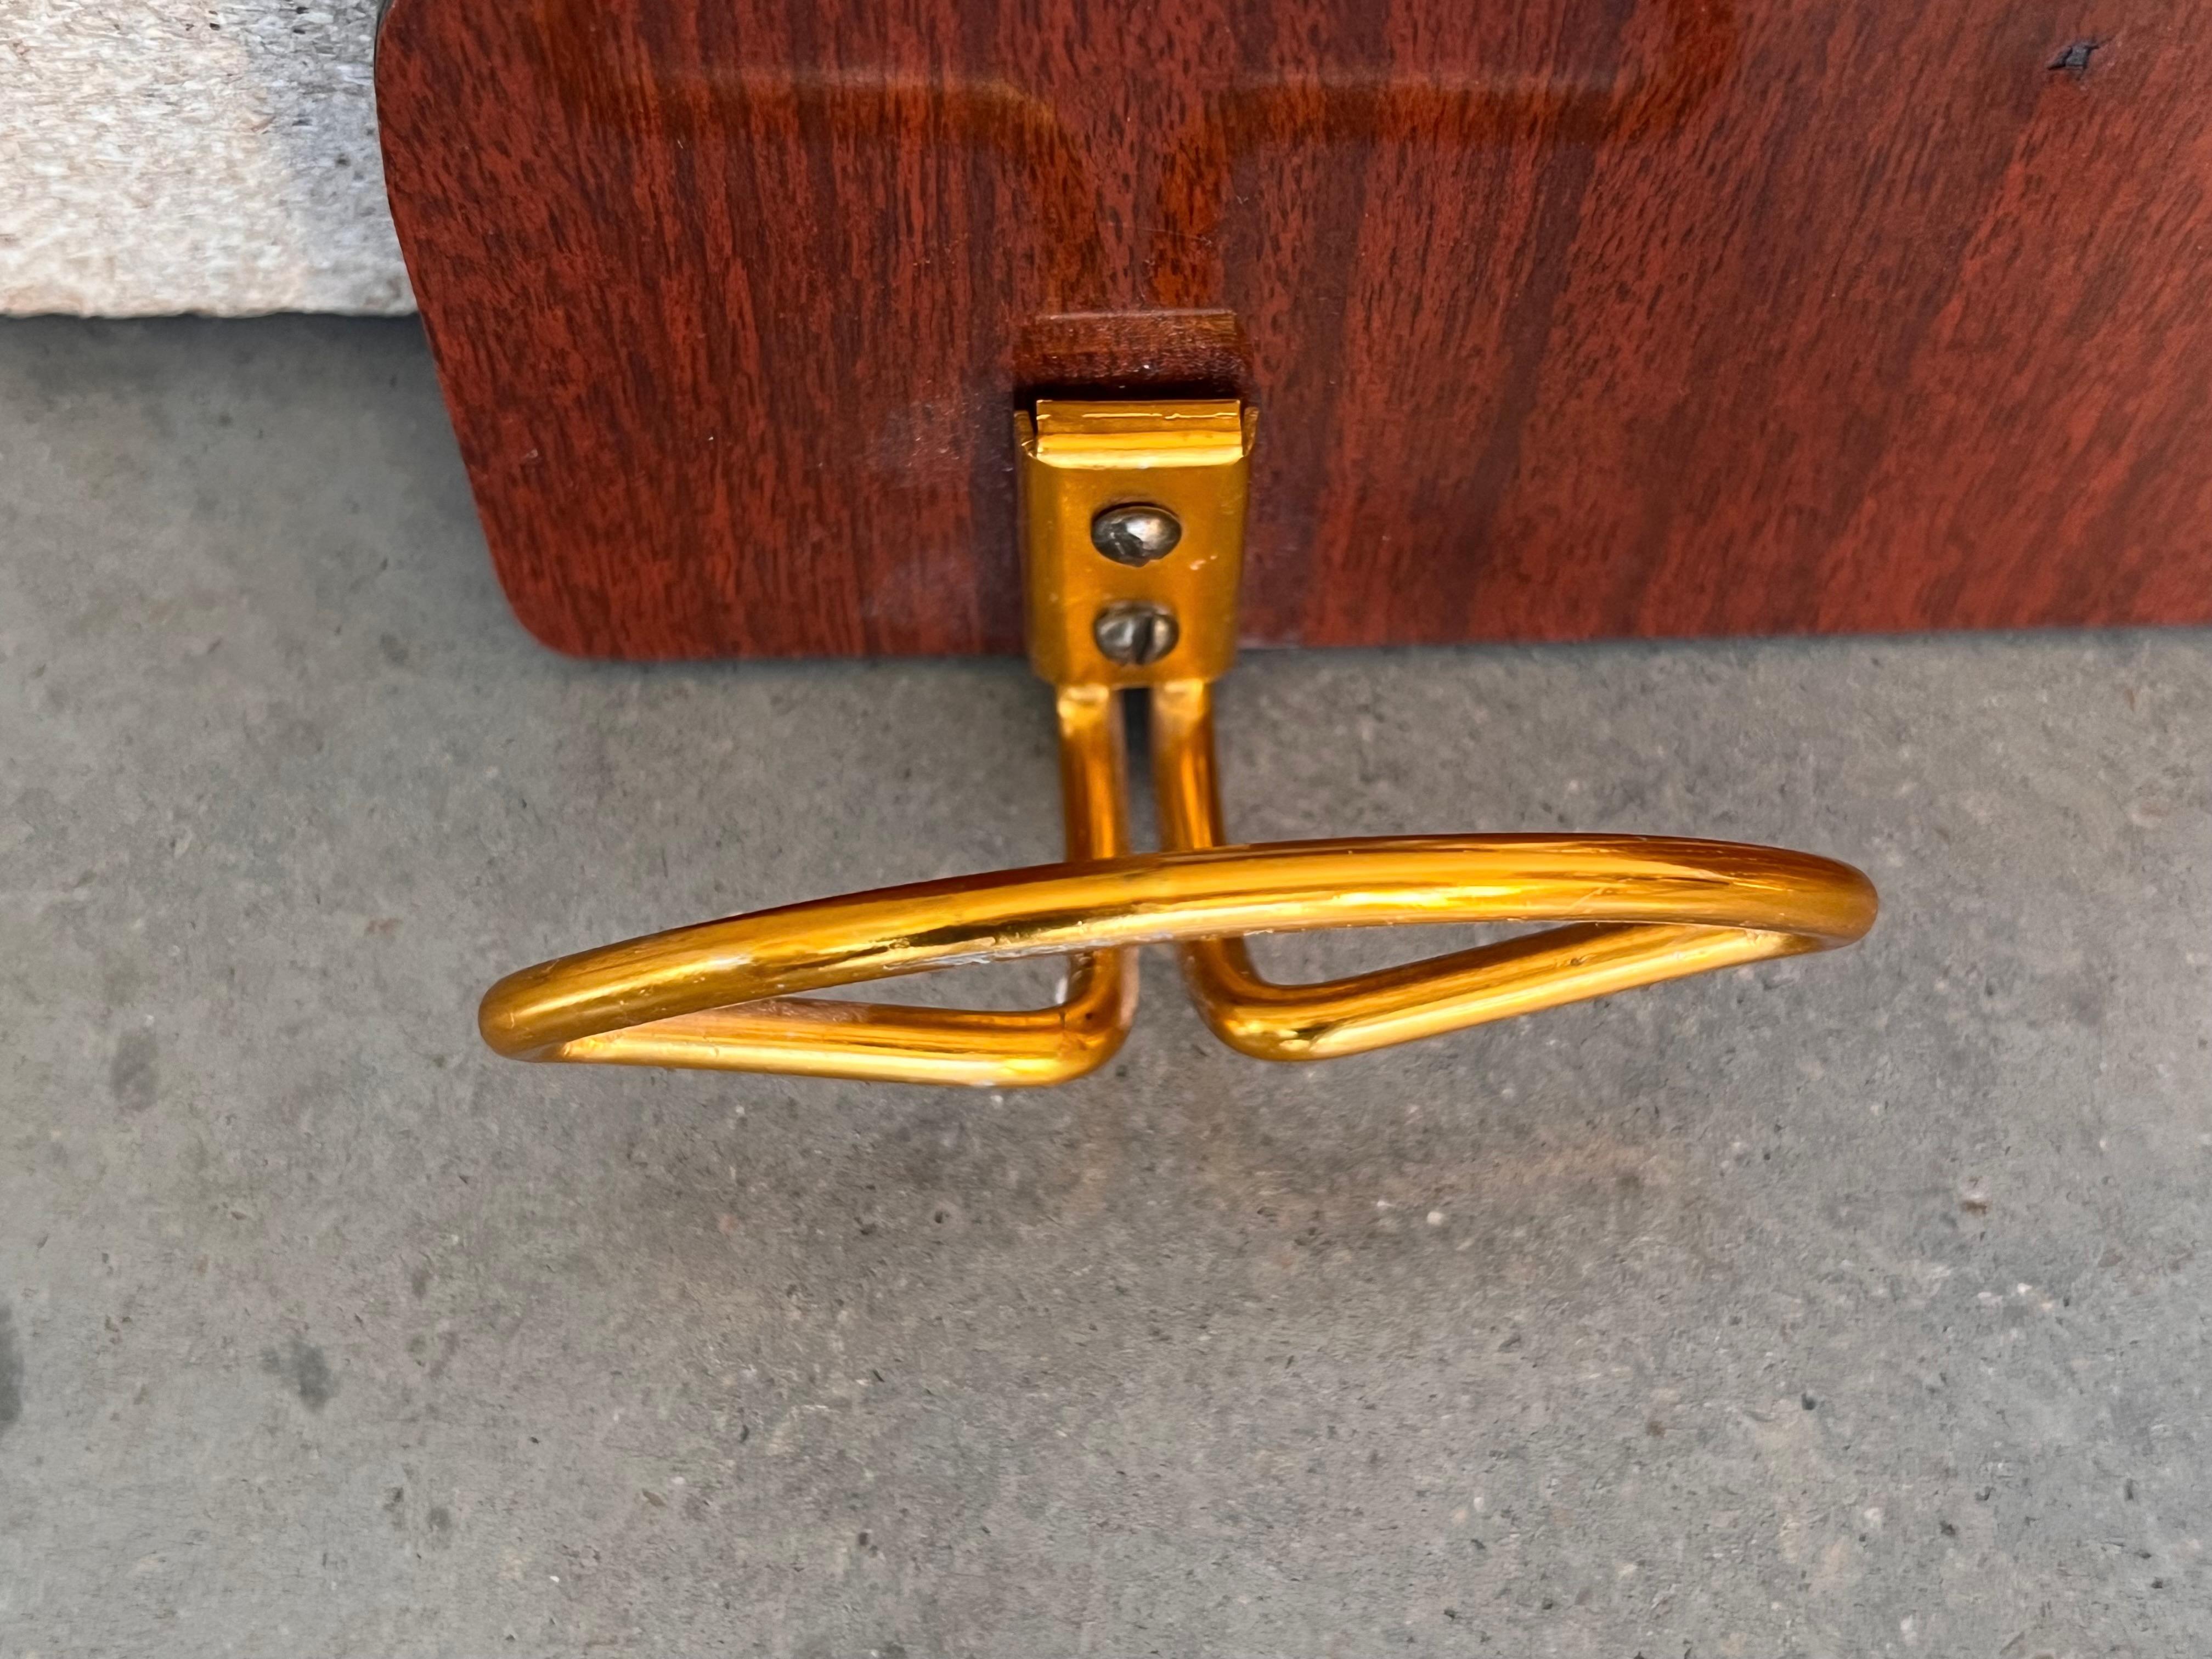 Italian, Mid-Century Modern Wood and Brass Wall Coat Hanger, 1960s For Sale 2